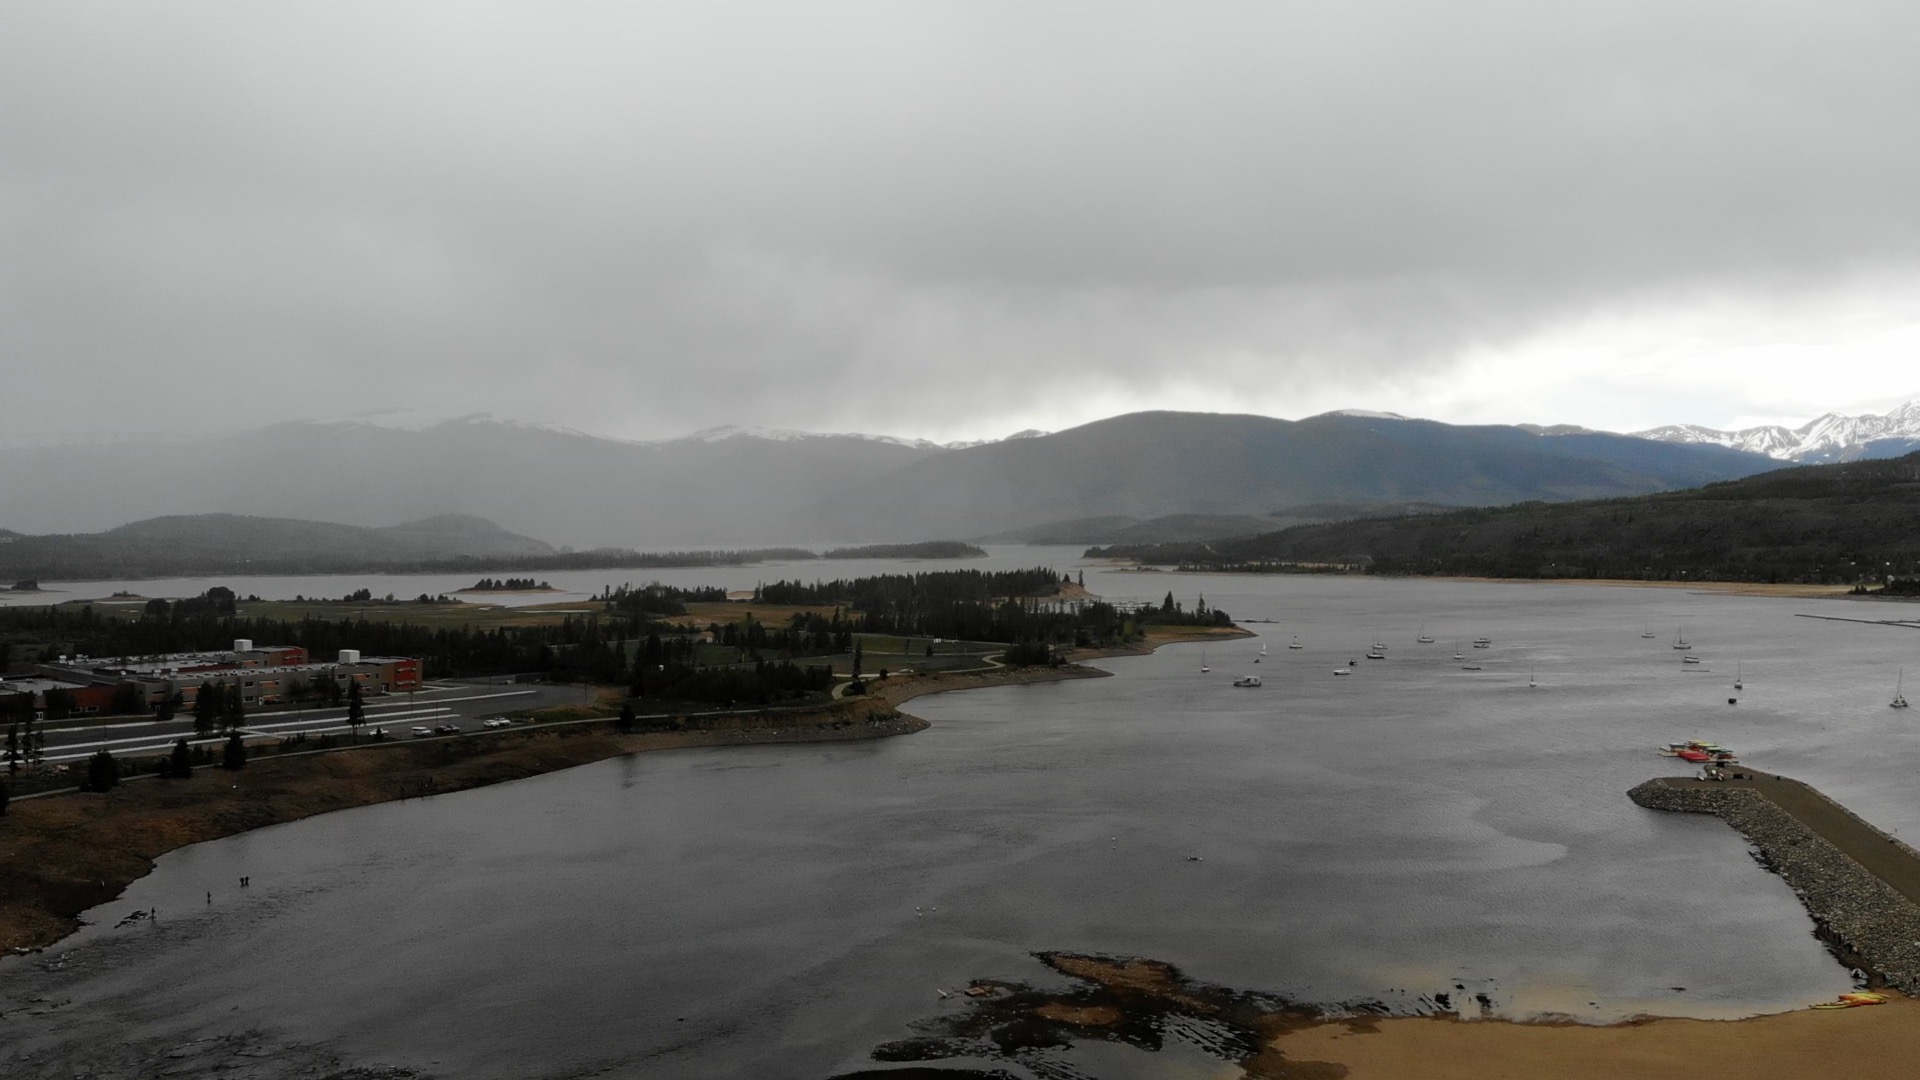 This picture shows Dillon Reservoir under cloudy skies.